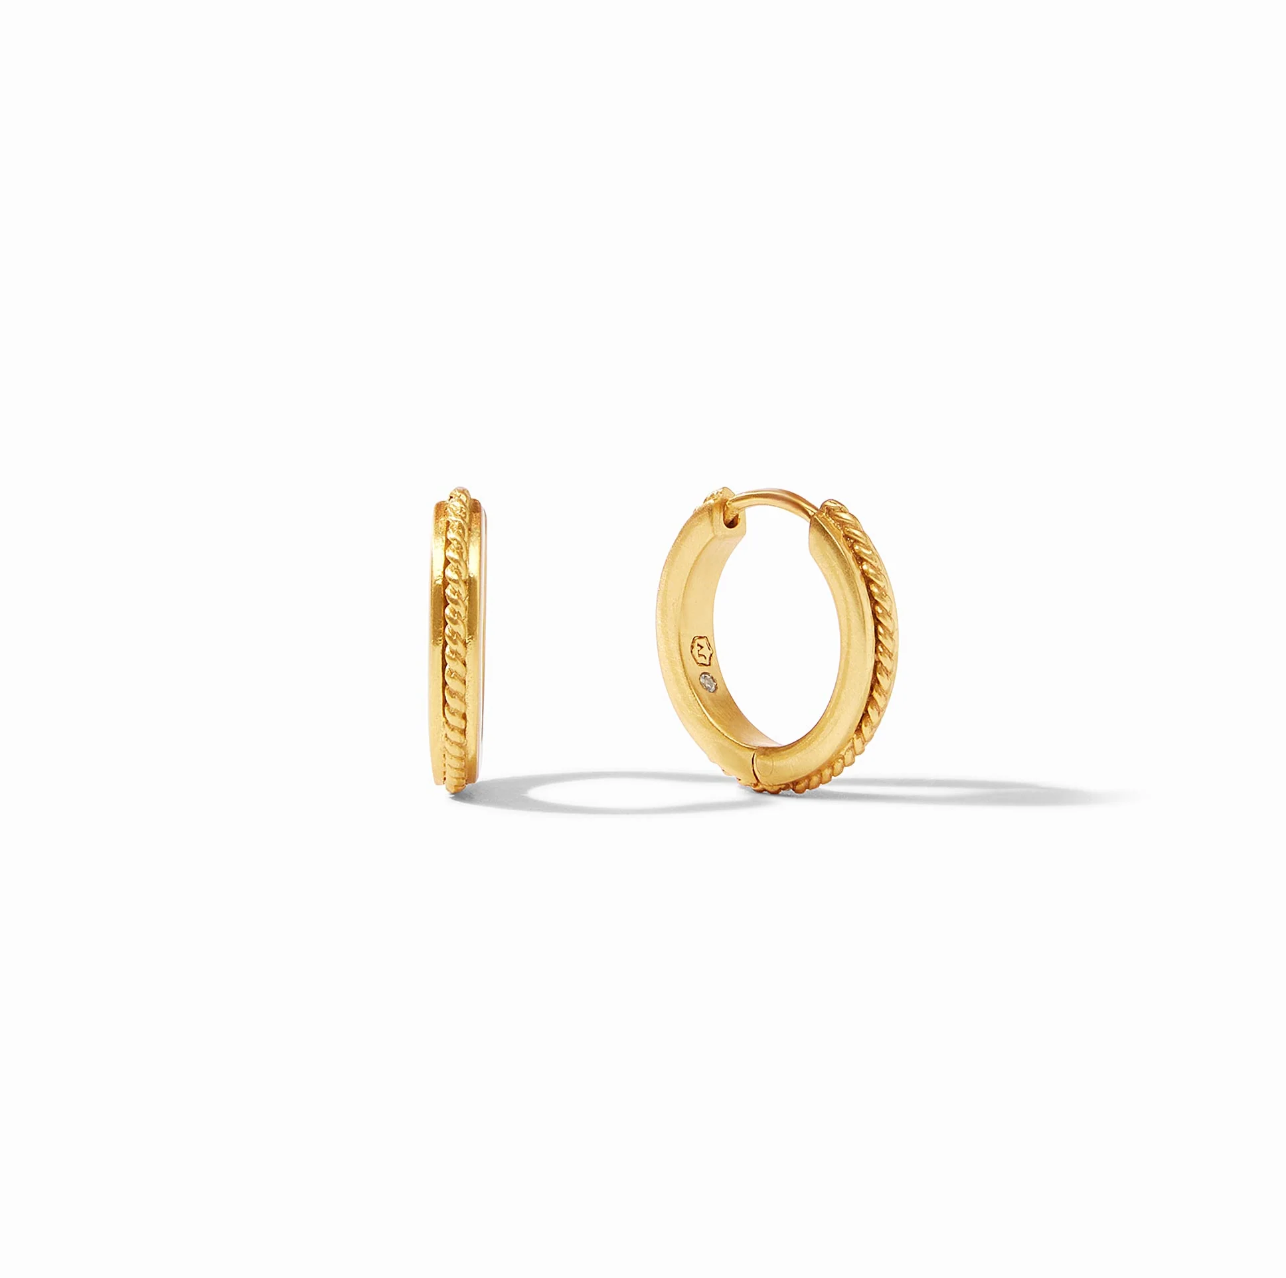 Delphine 2-in-1 Earring - Gold - Julie Vos